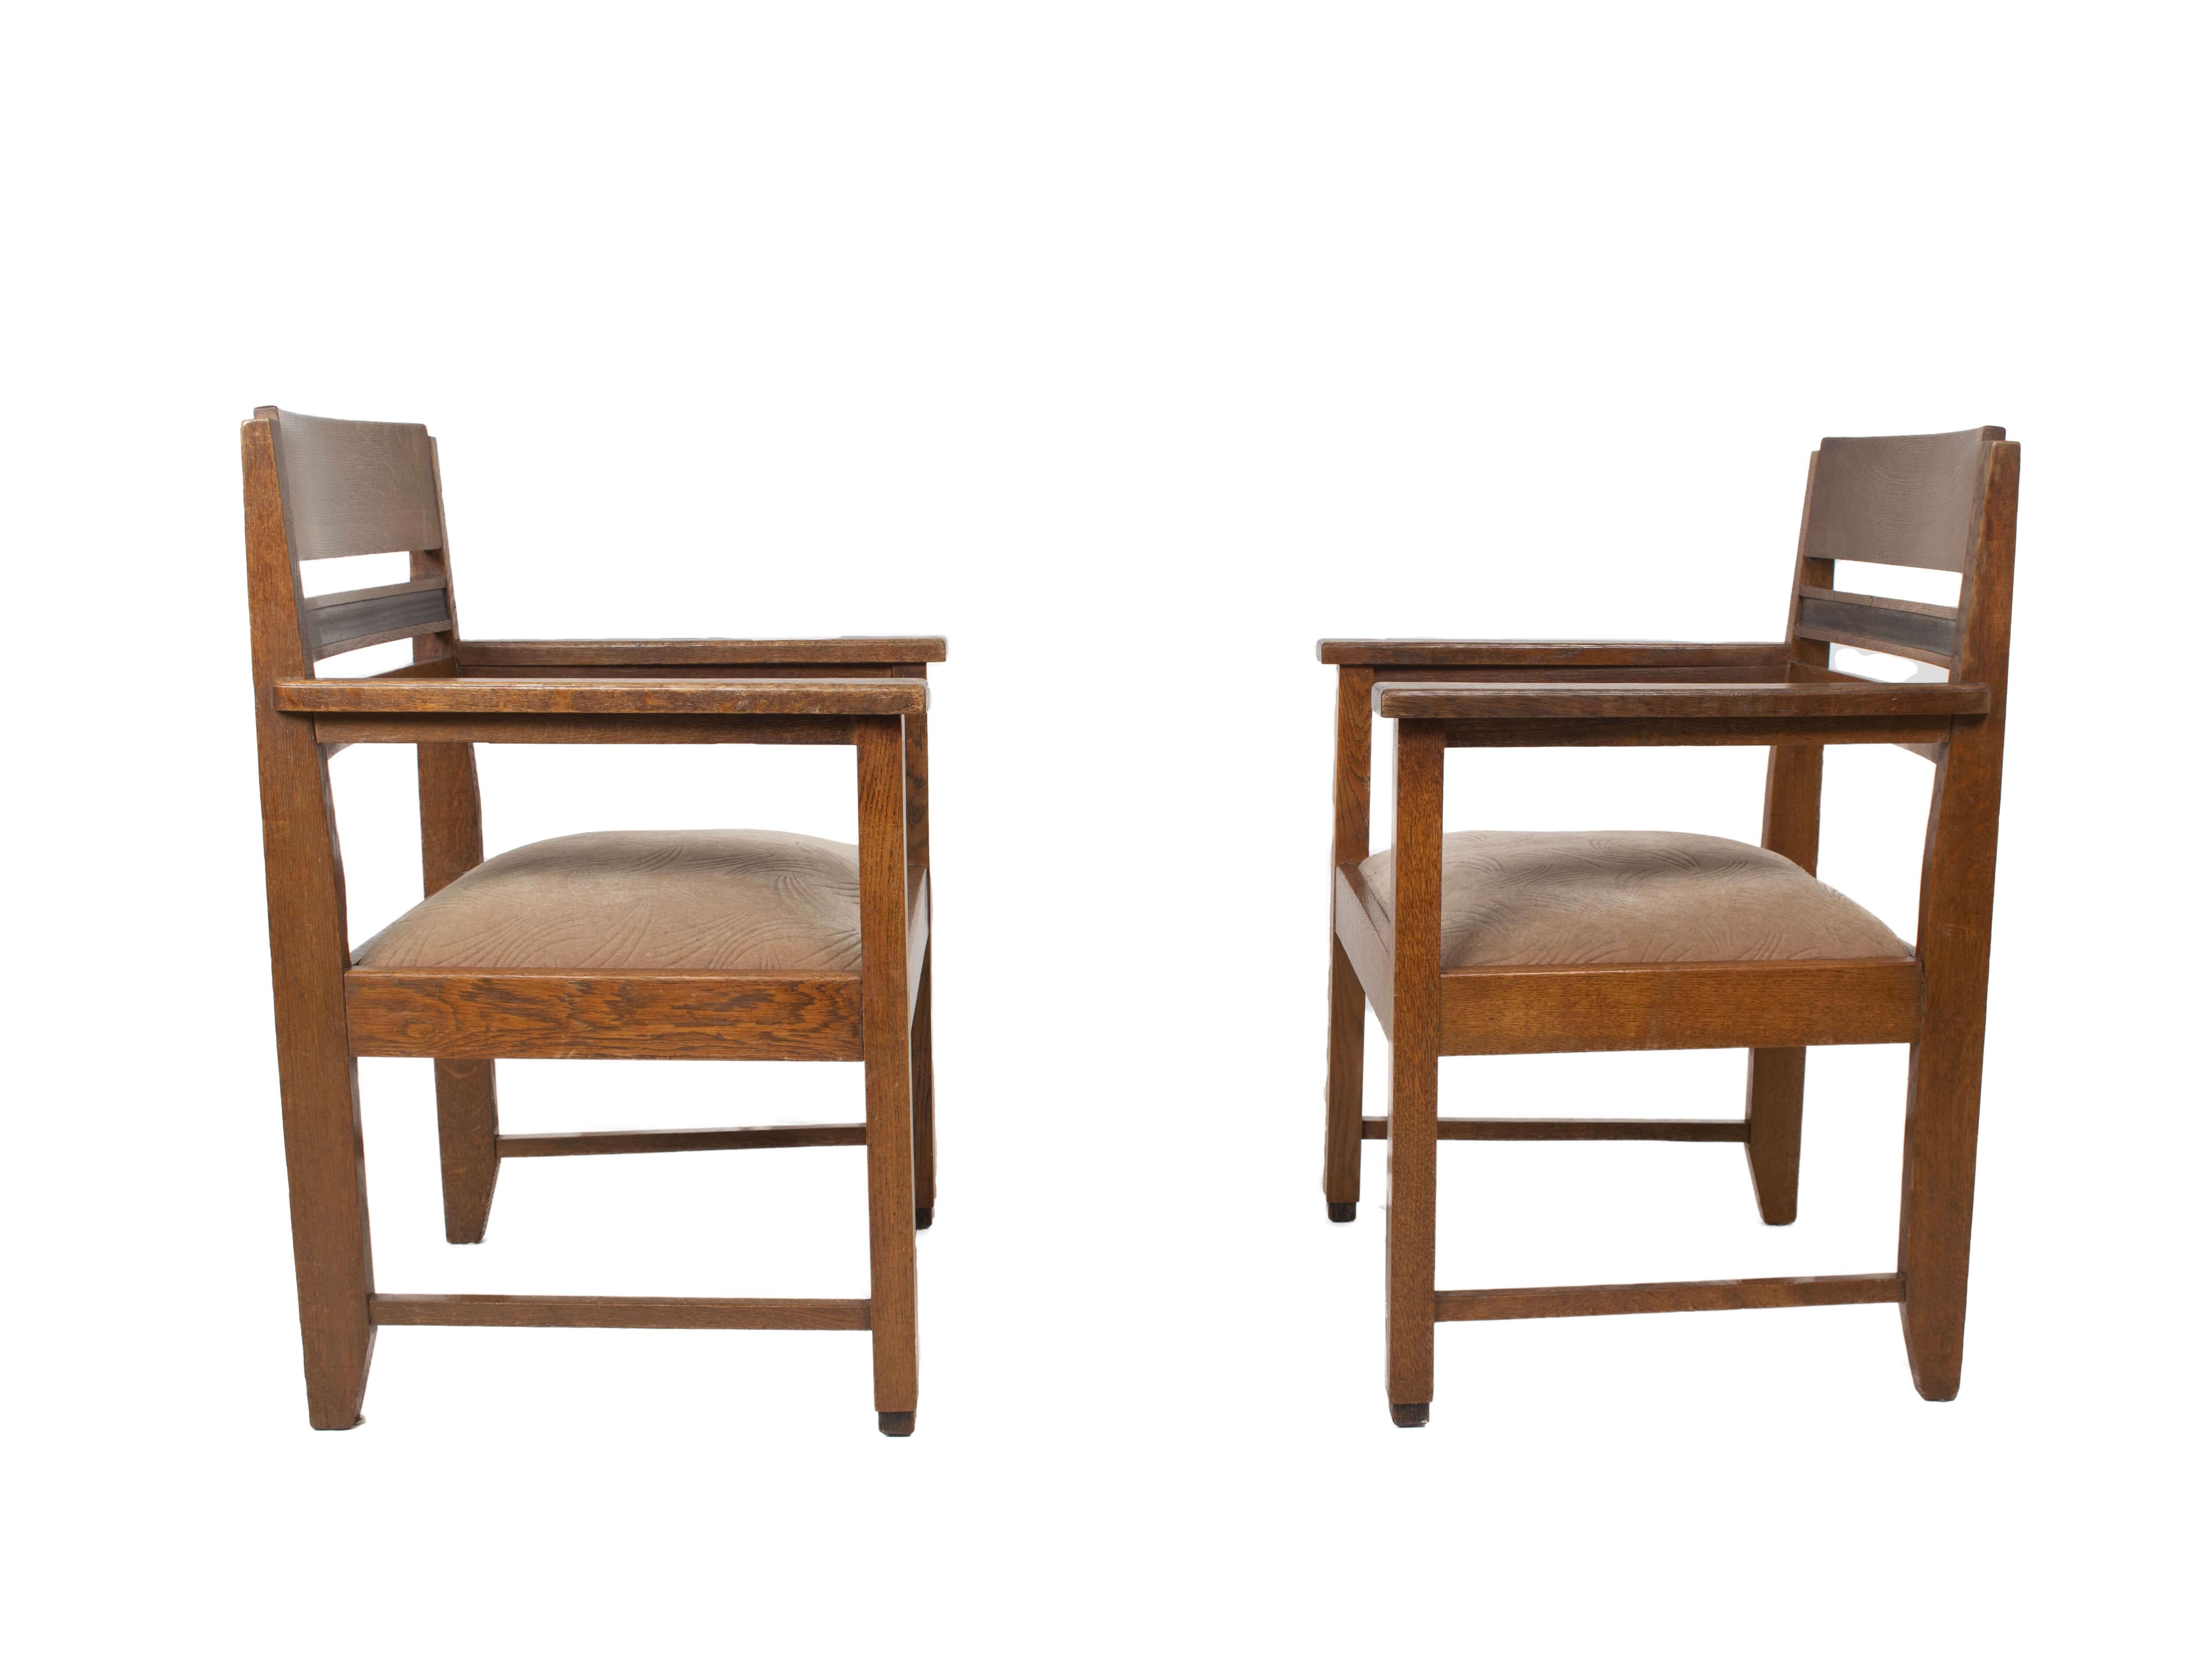 Set of Robust Amsterdam School arm chairs from the Netherlands ~1930s. These armchairs have the well-known Amsterdam School combination of coromandel and oak wood. The seating is with beige fabric. The chairs are in good condition with normal wear